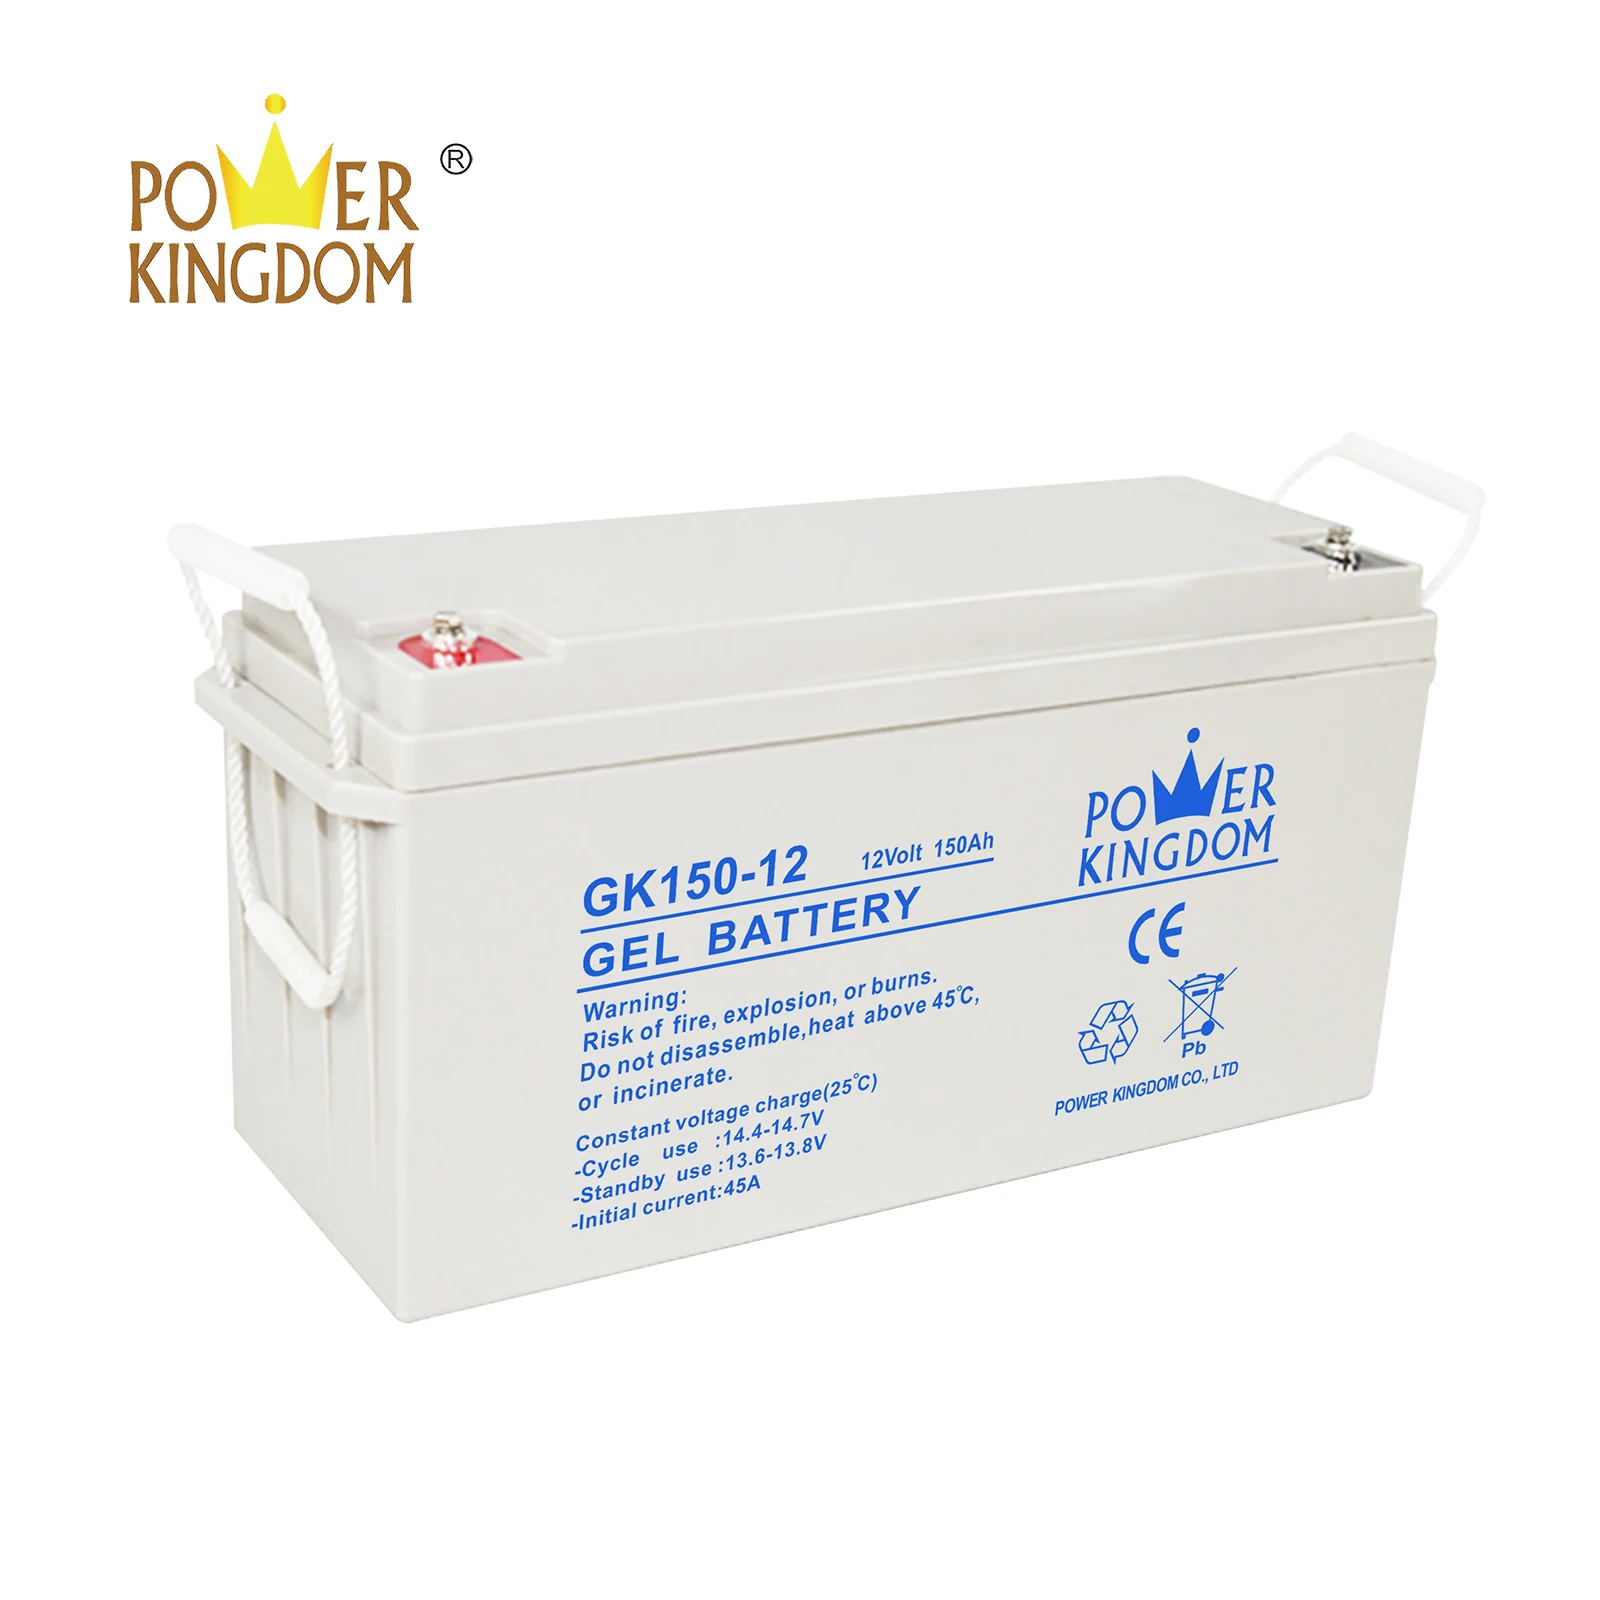 Power Kingdom High-quality lead acid battery low voltage with good price wind power system